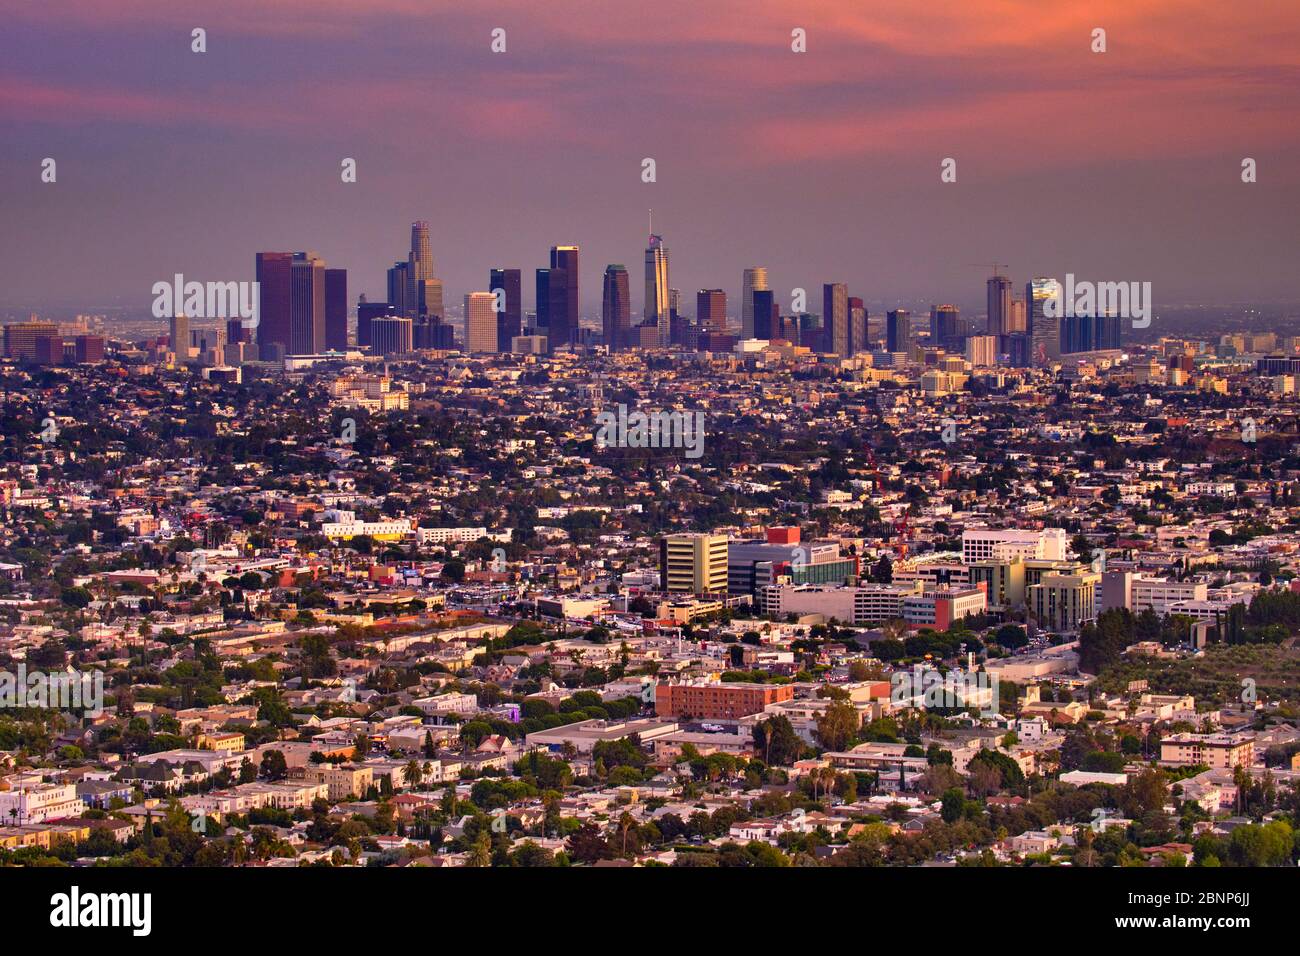 USA, United States of America, California, Los Angeles, Downtown, Hollywood, Beverly Hills, view from Griffith Observatory, Stock Photo